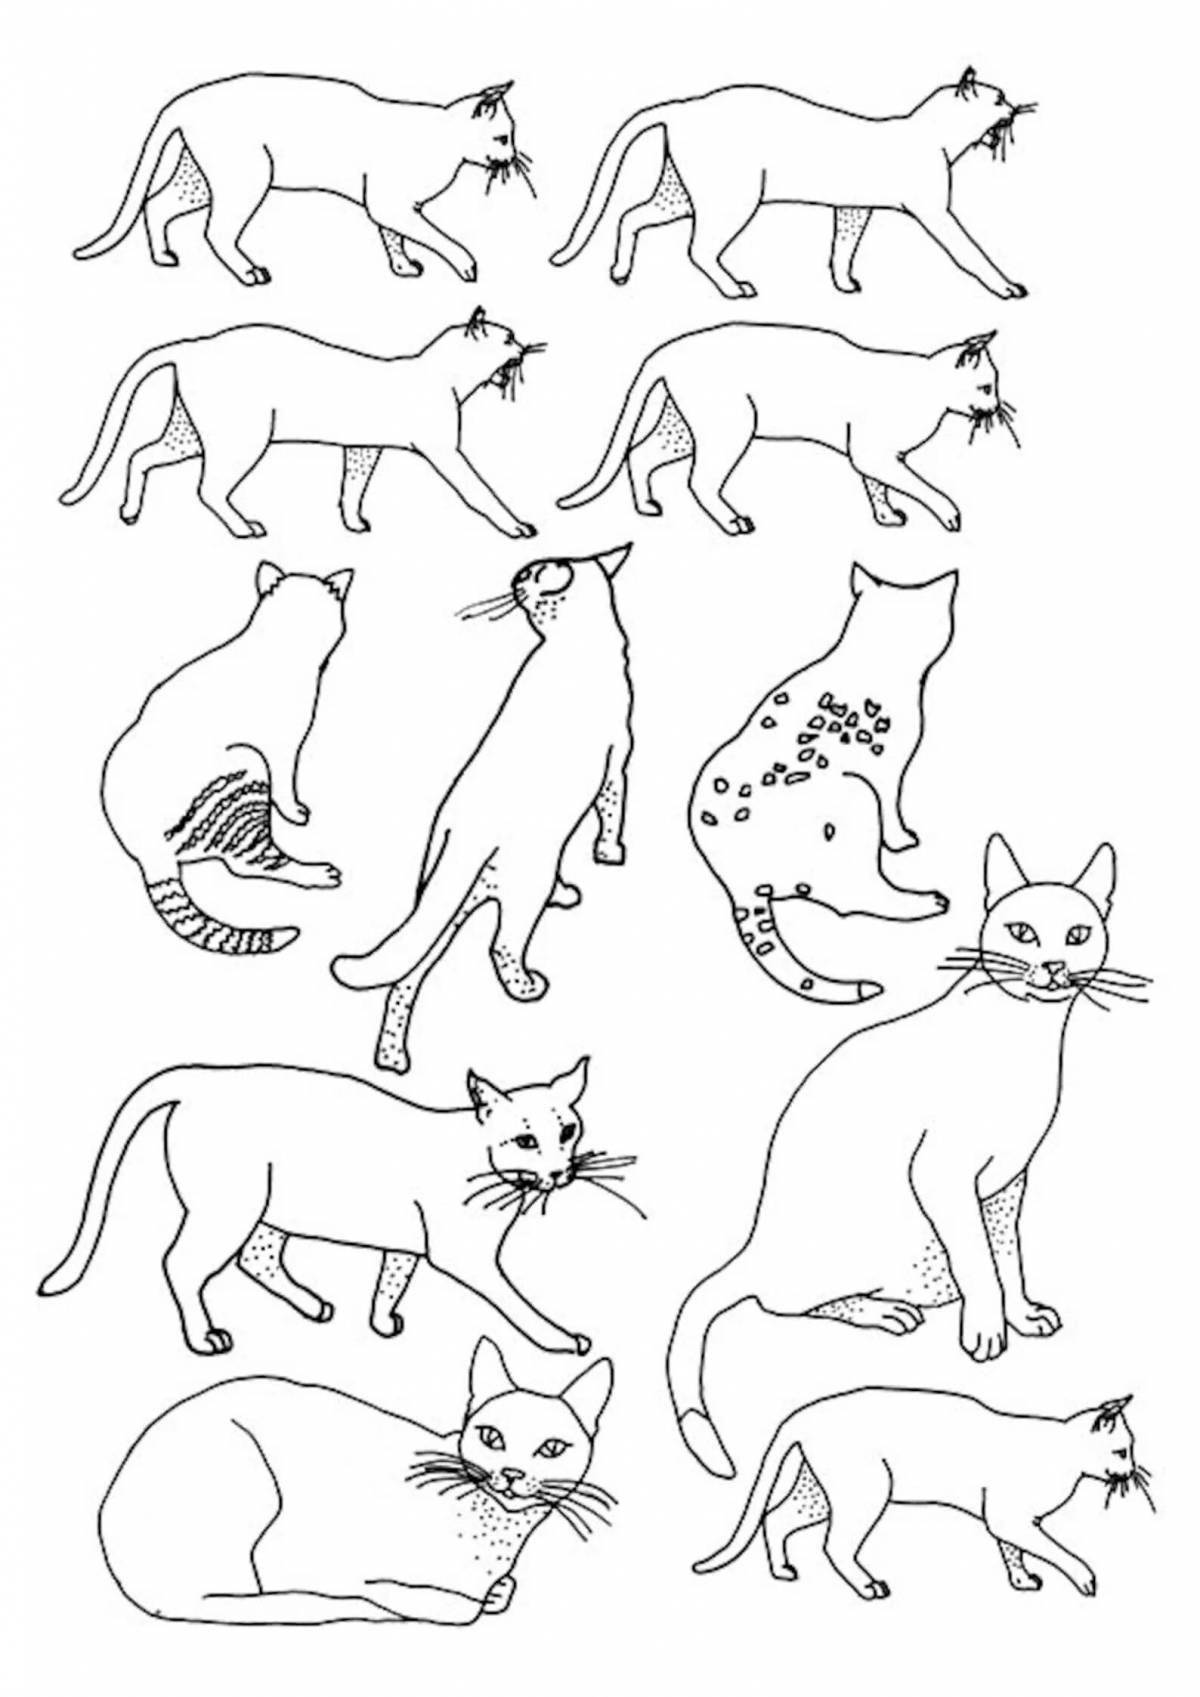 Majestic all cats coloring book